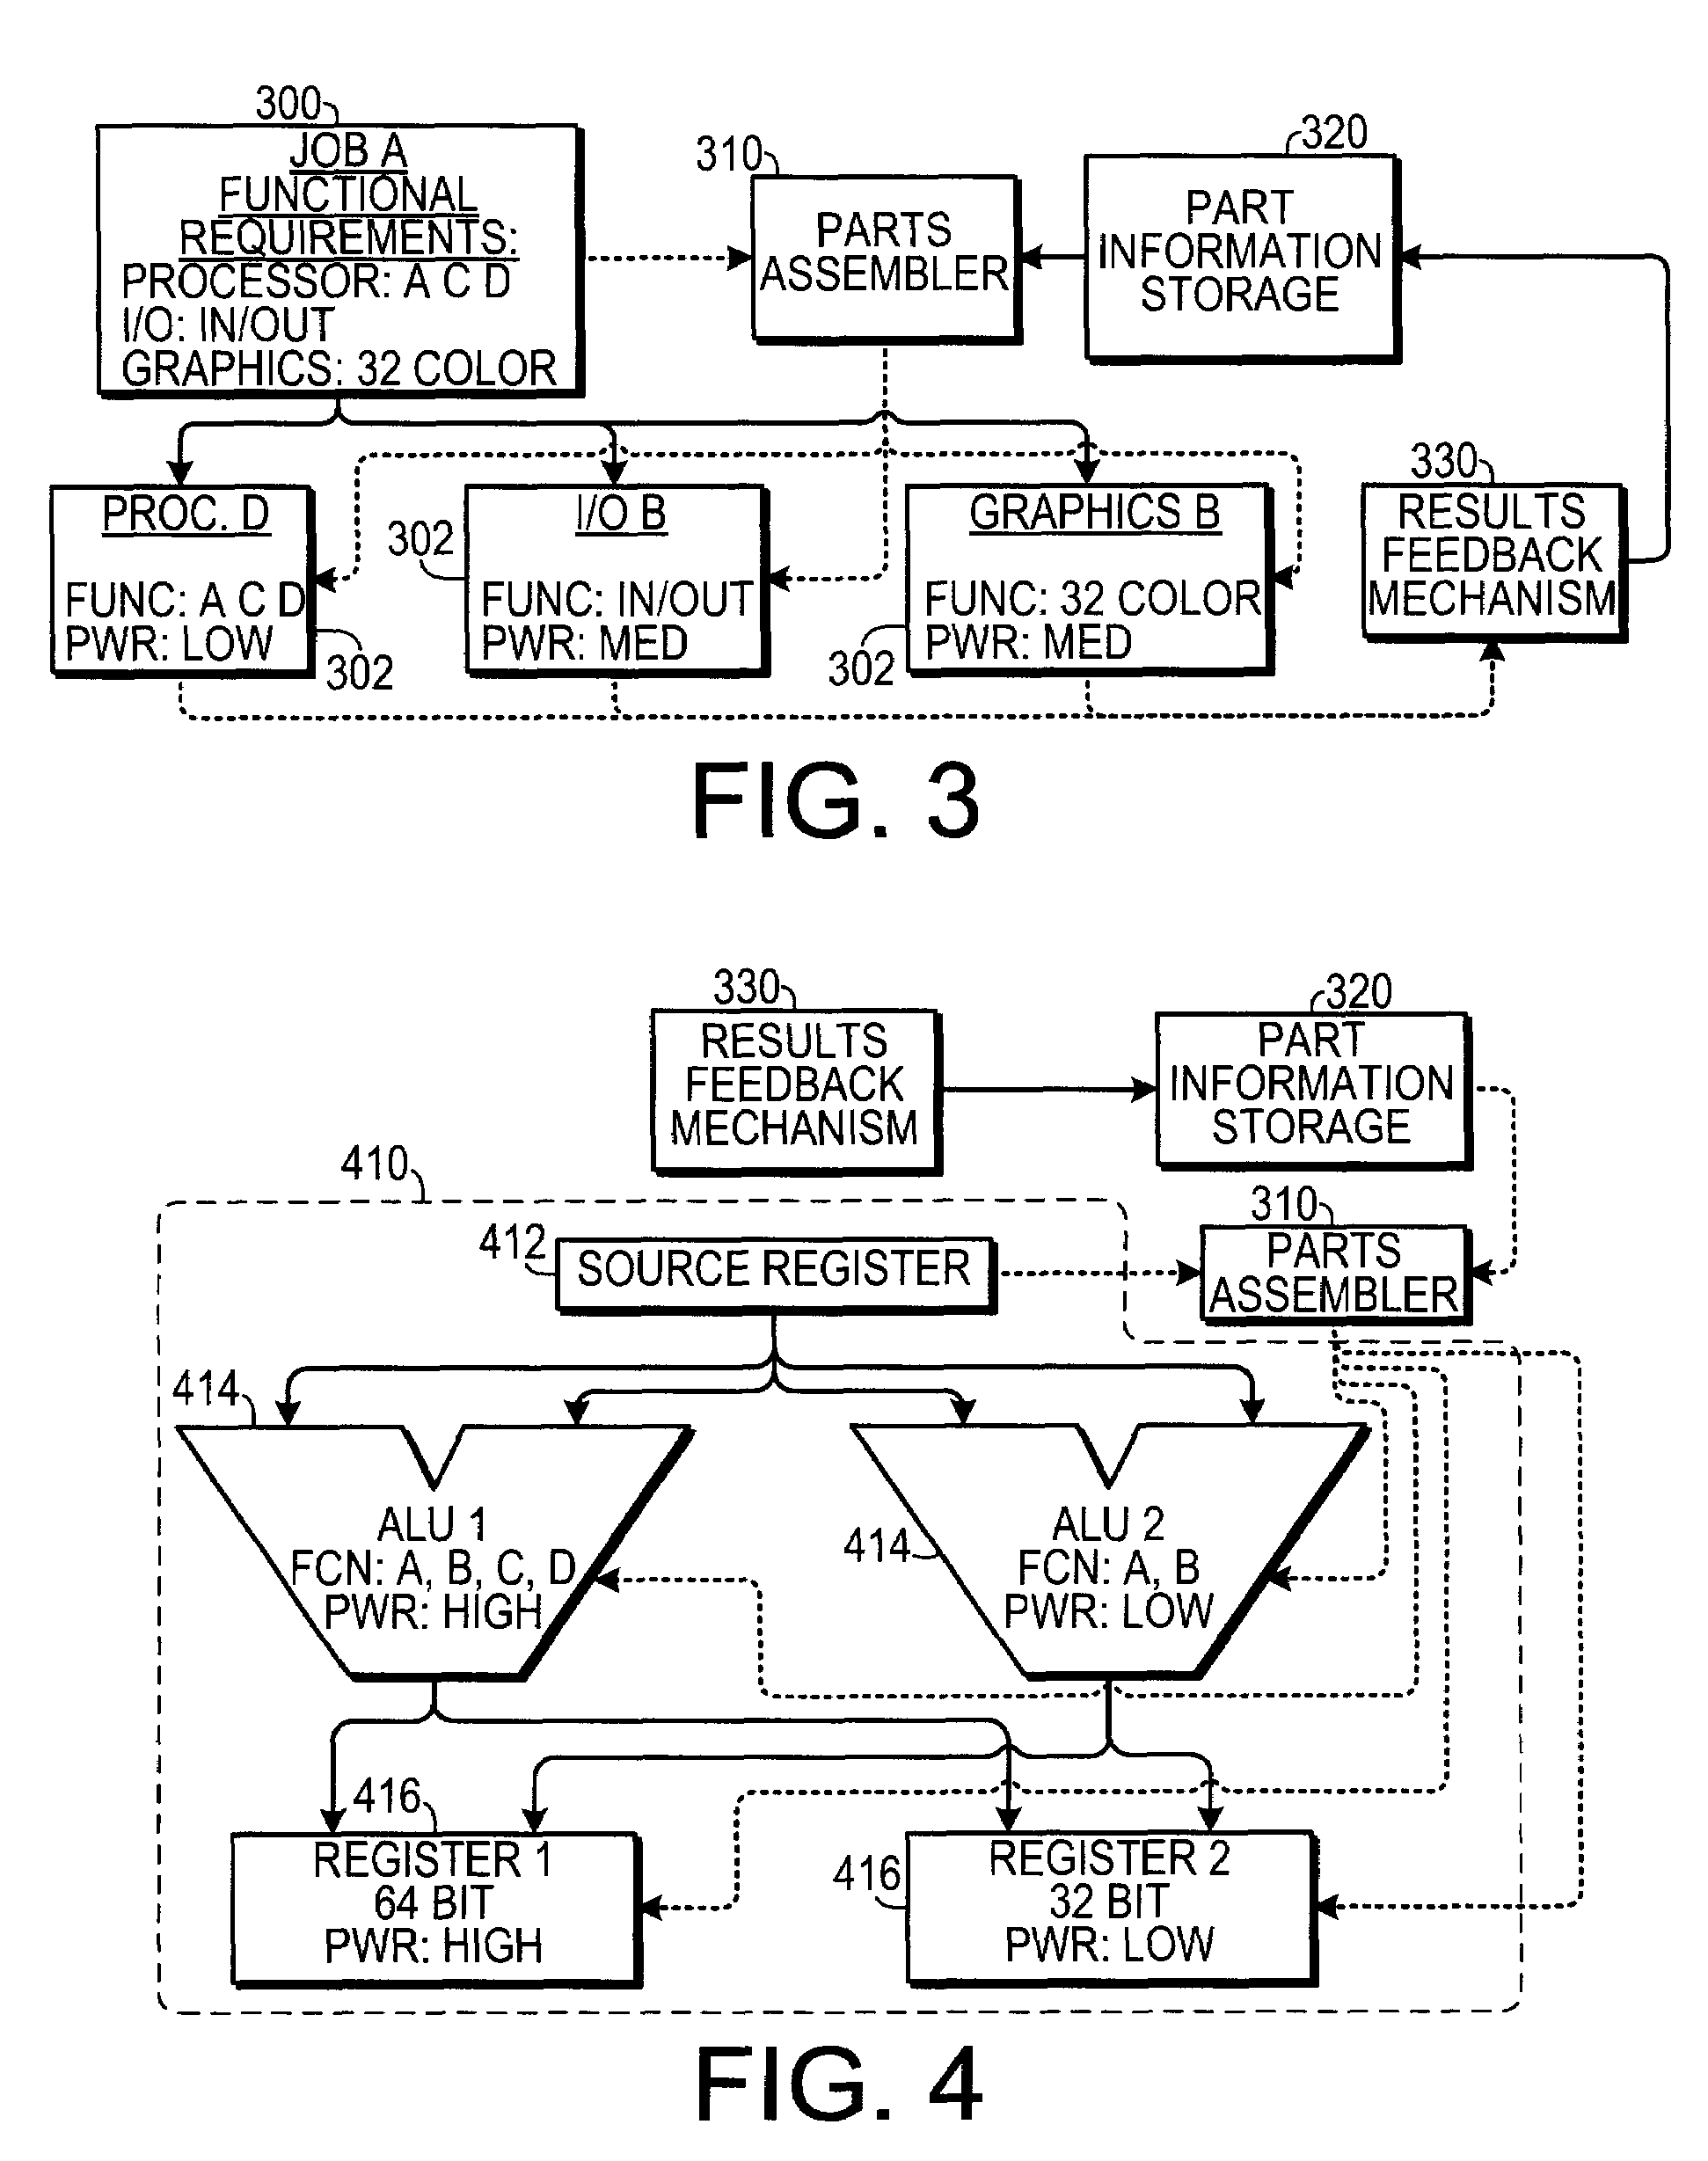 Selection of Processors for Job Scheduling Using Measured Power Consumption Ratings